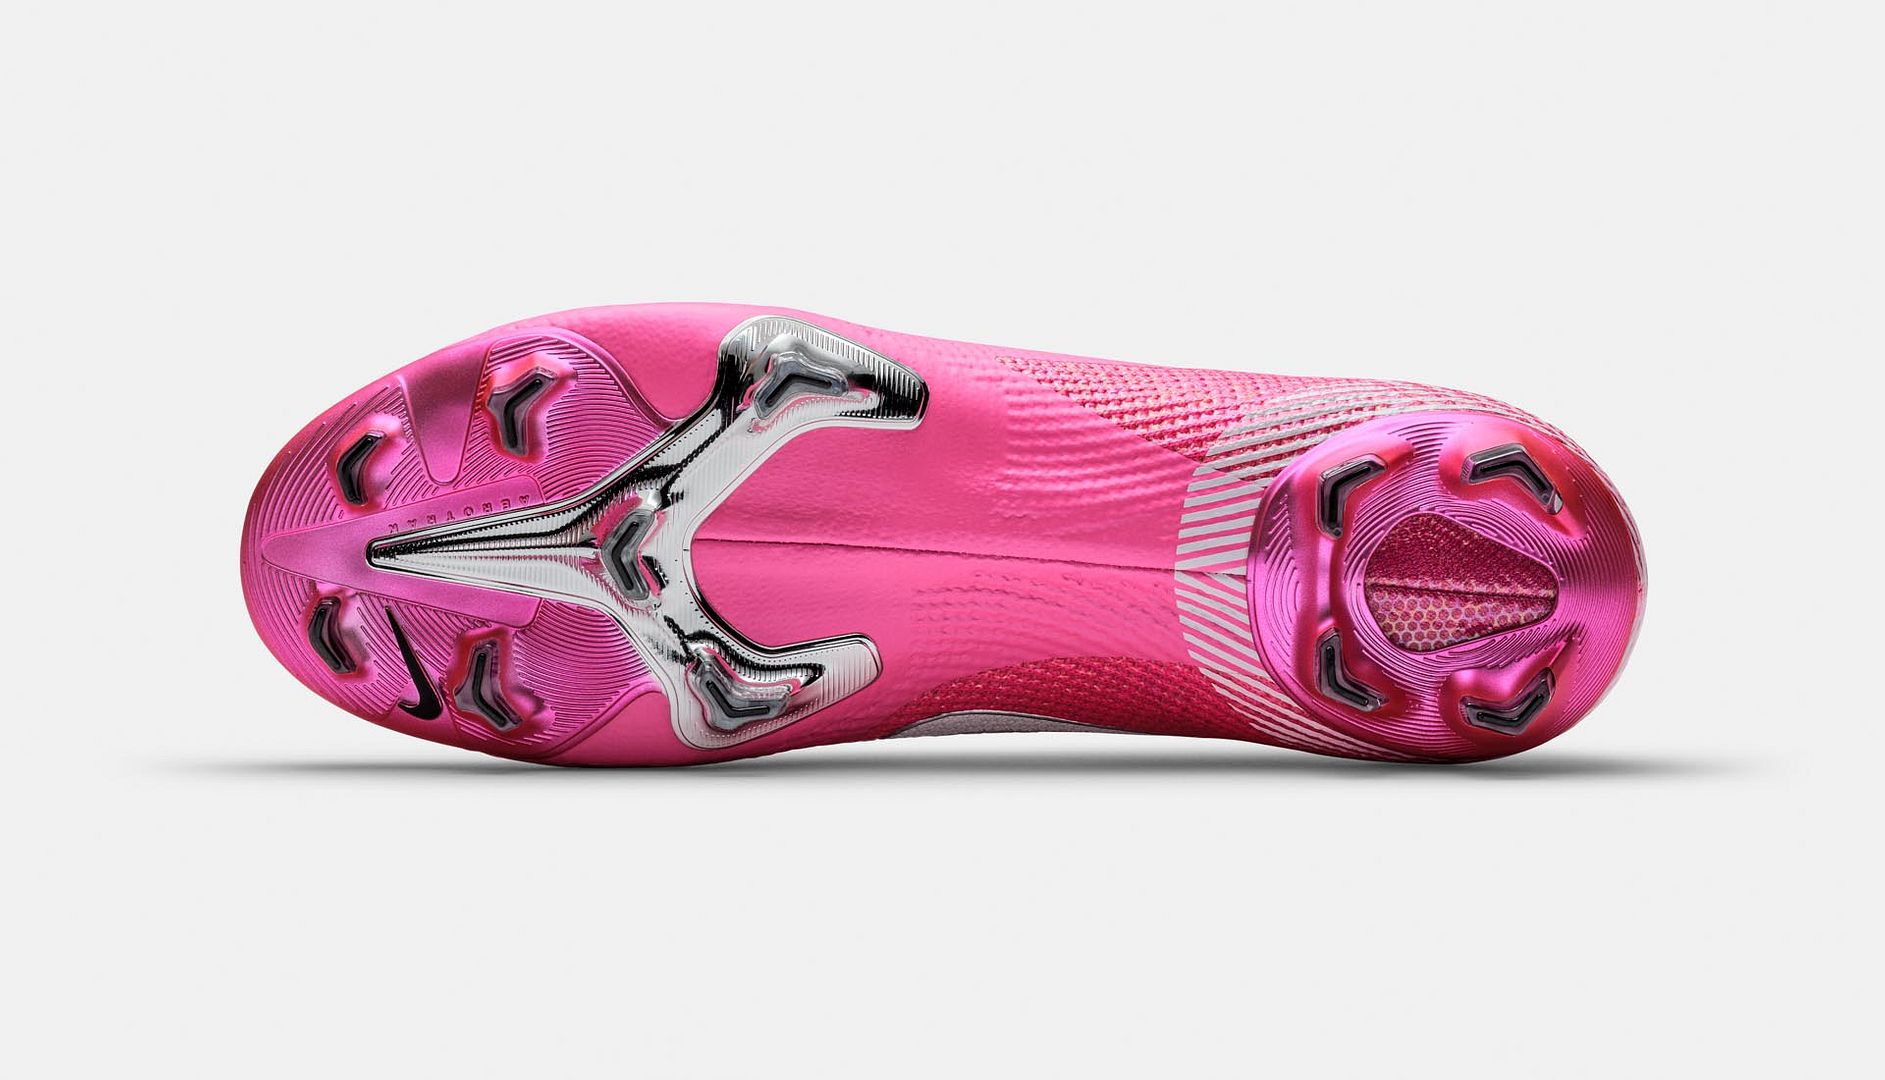 The beautiful look of the Nike Mercurial Mbappé Rosa